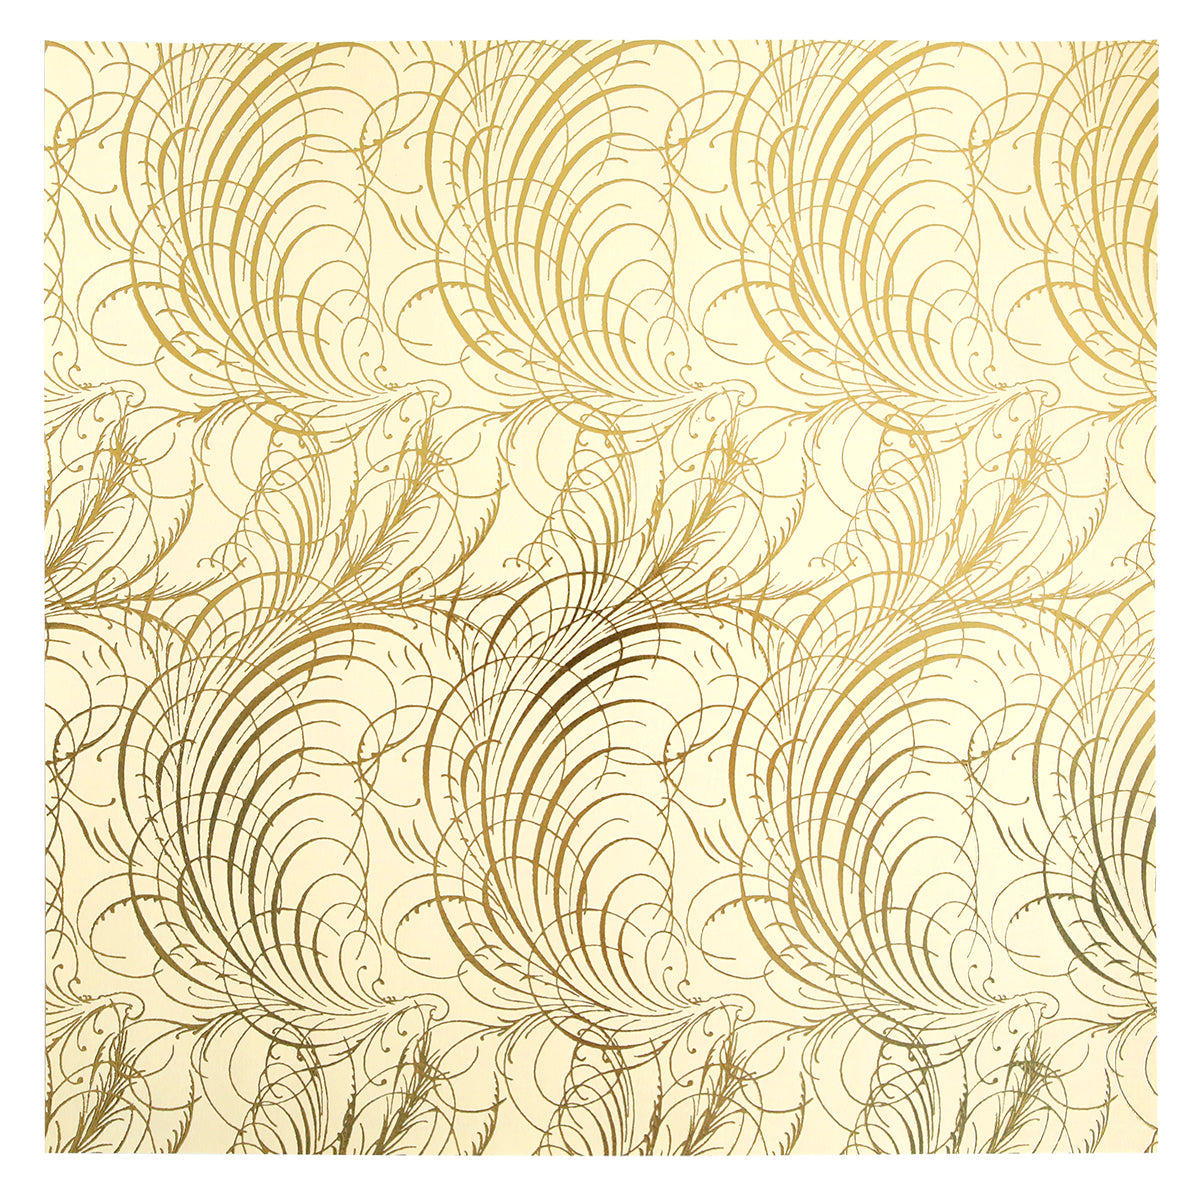 An Anna Griffin Gold Foil Feather 12x12 Cardstock wallpaper with swirls on it.